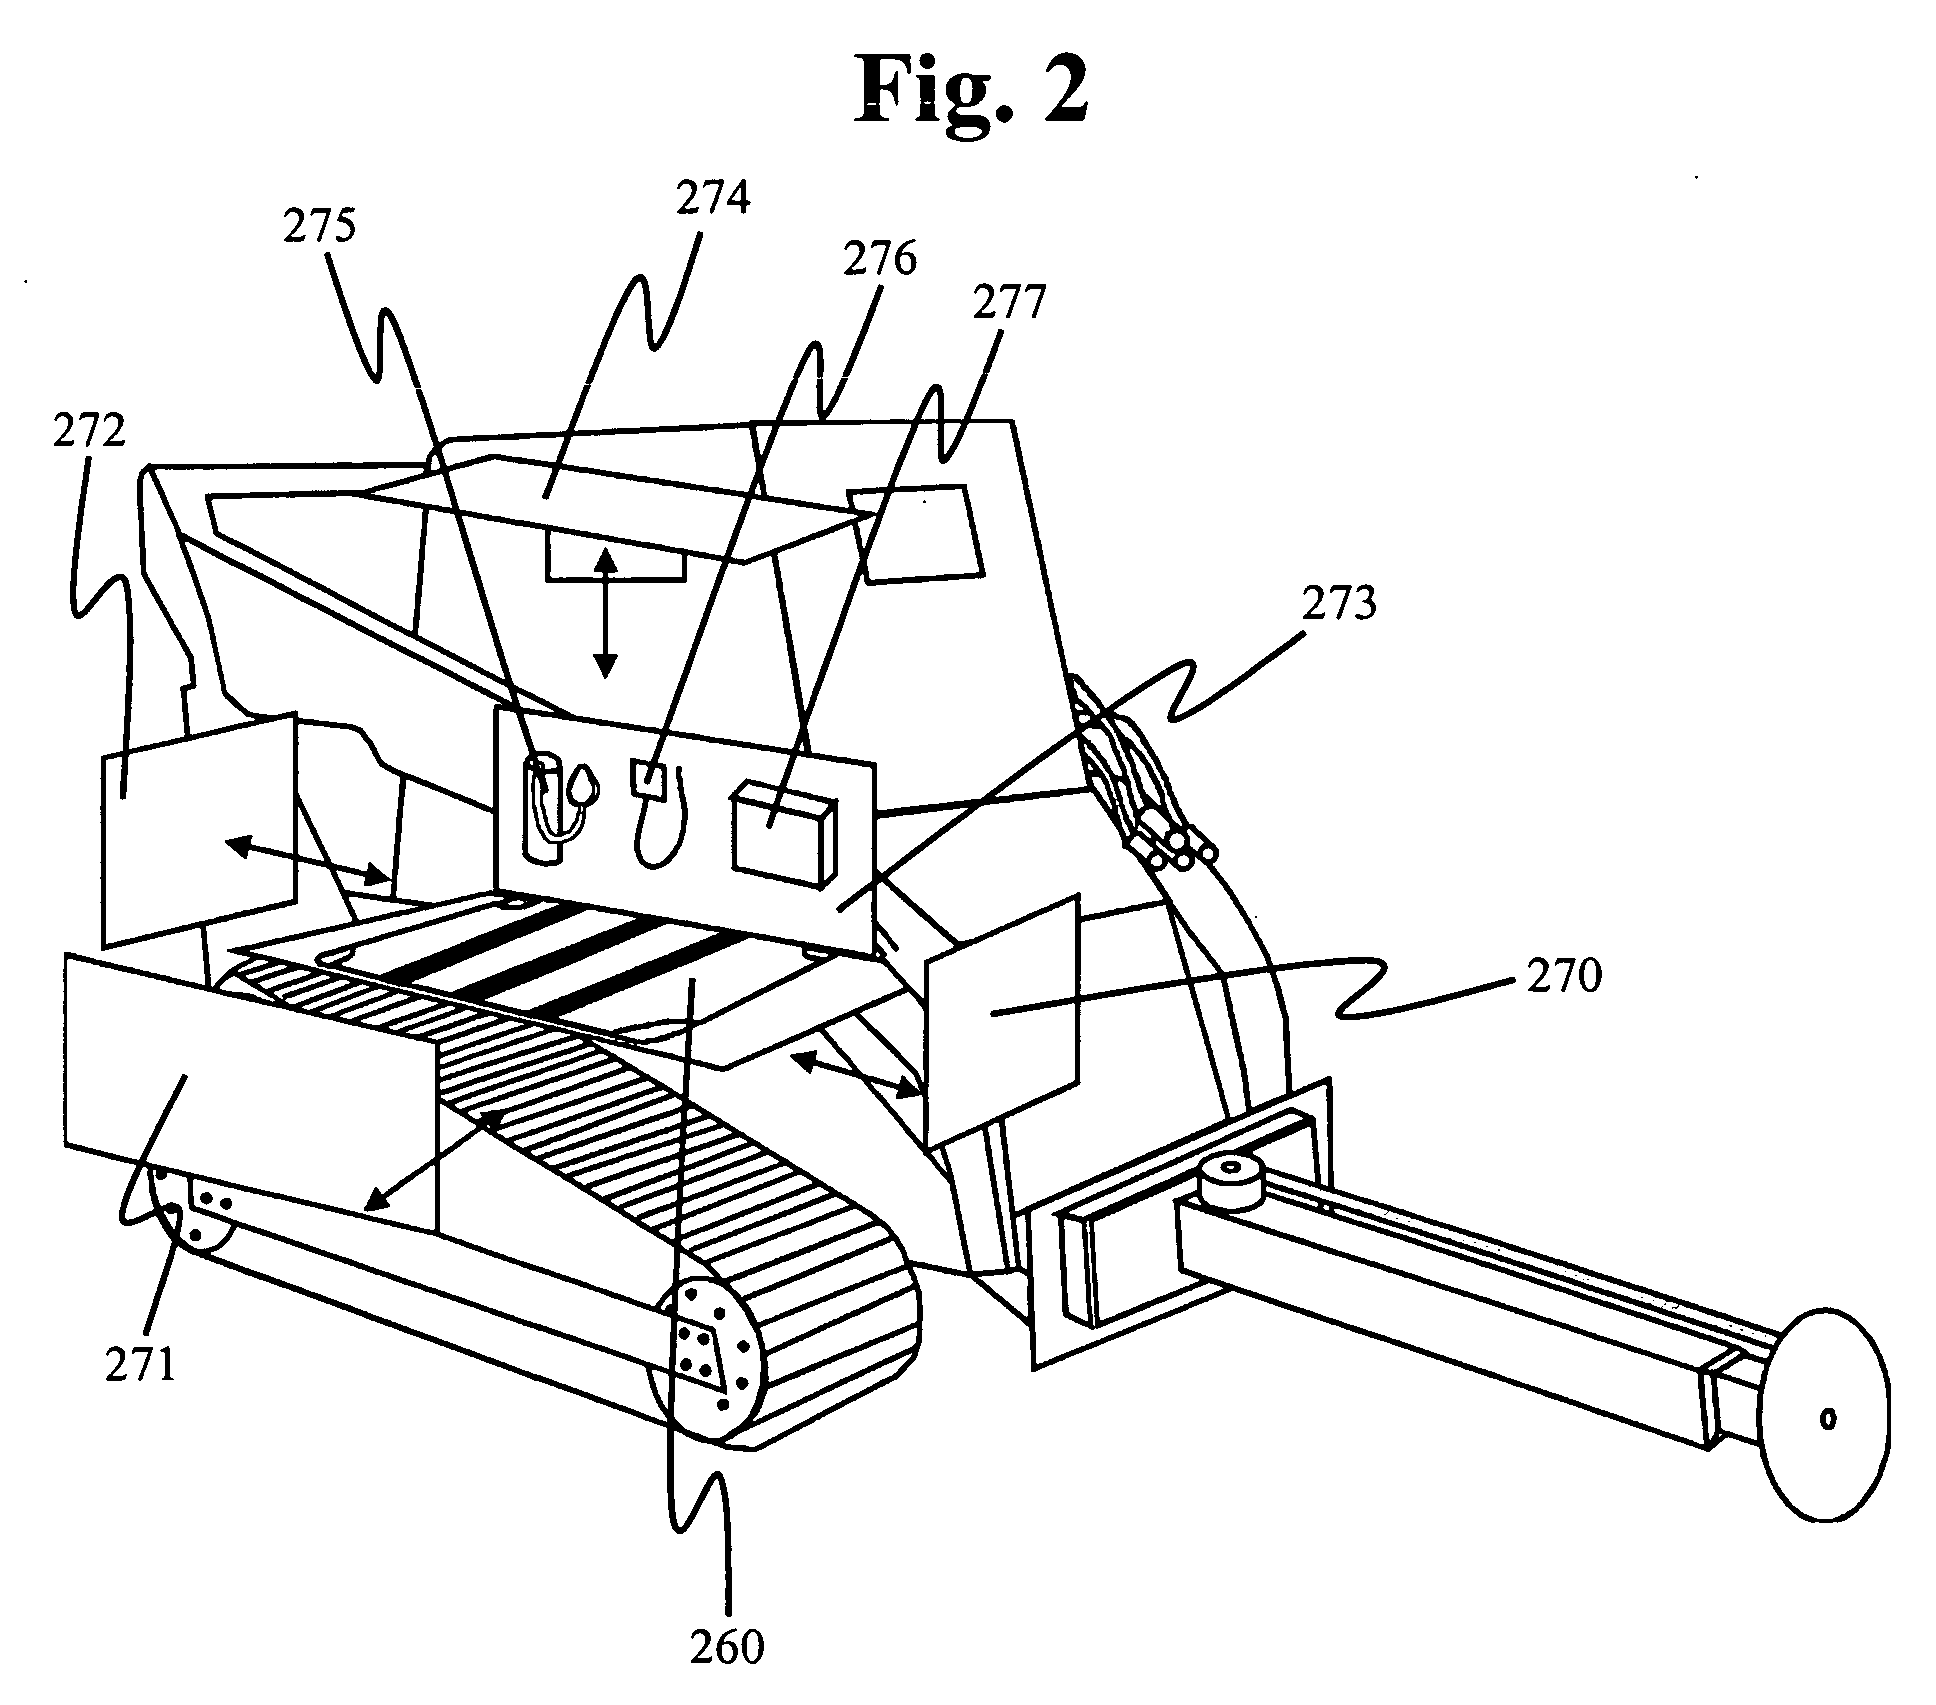 Armored tactical vehicle with modular apparatus